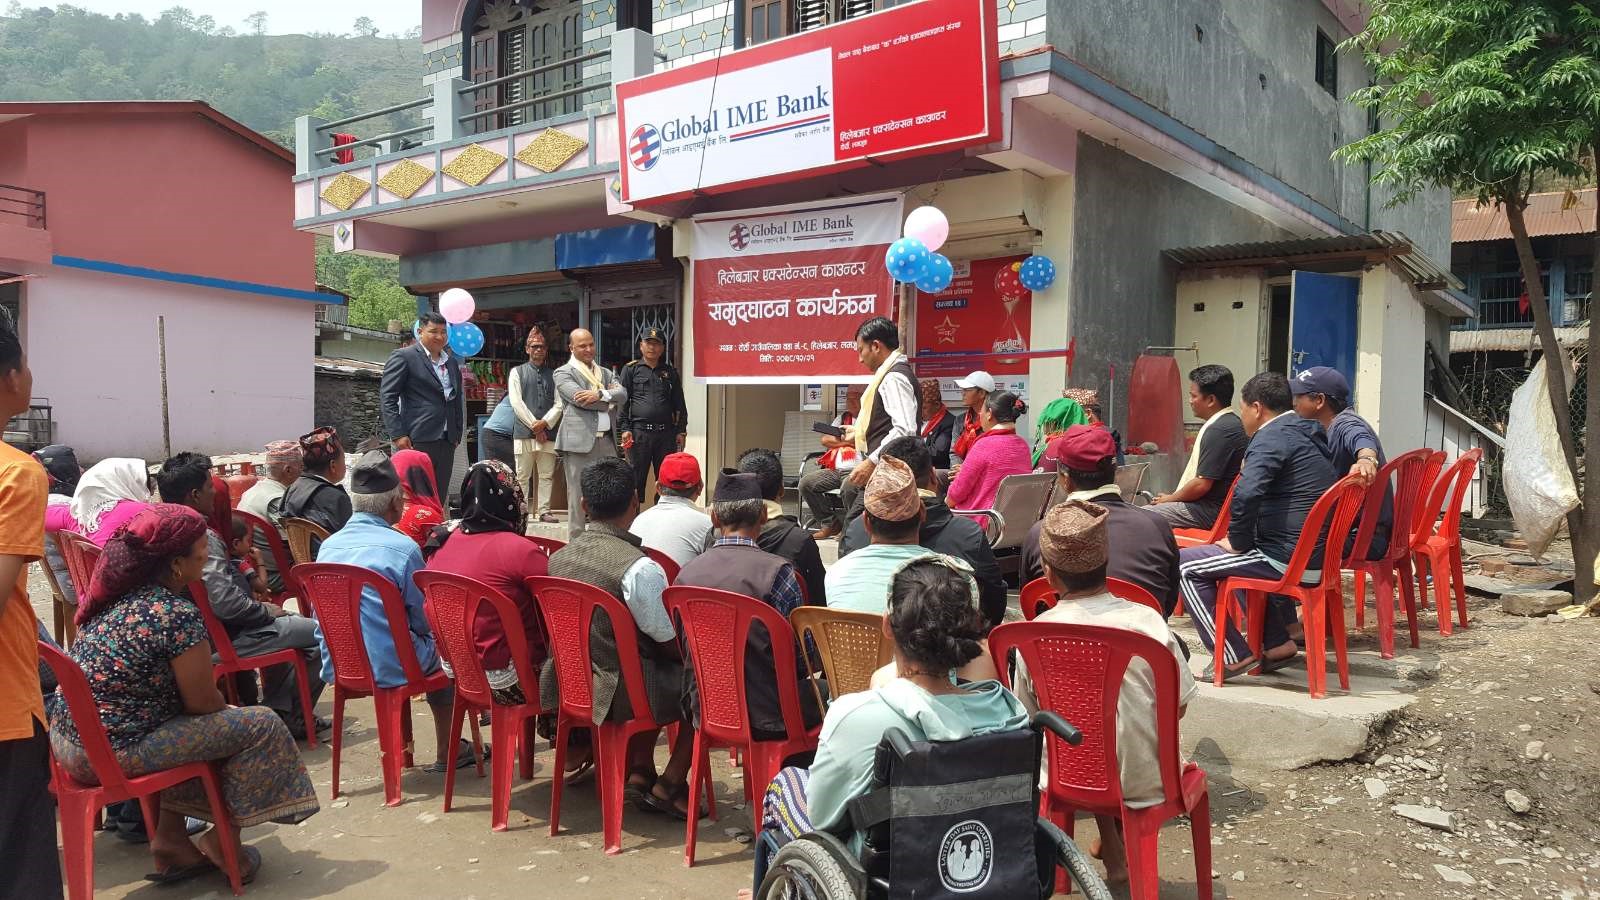 Global IME Bank’s Extension Counter in Lamjung’s Hile Bazar